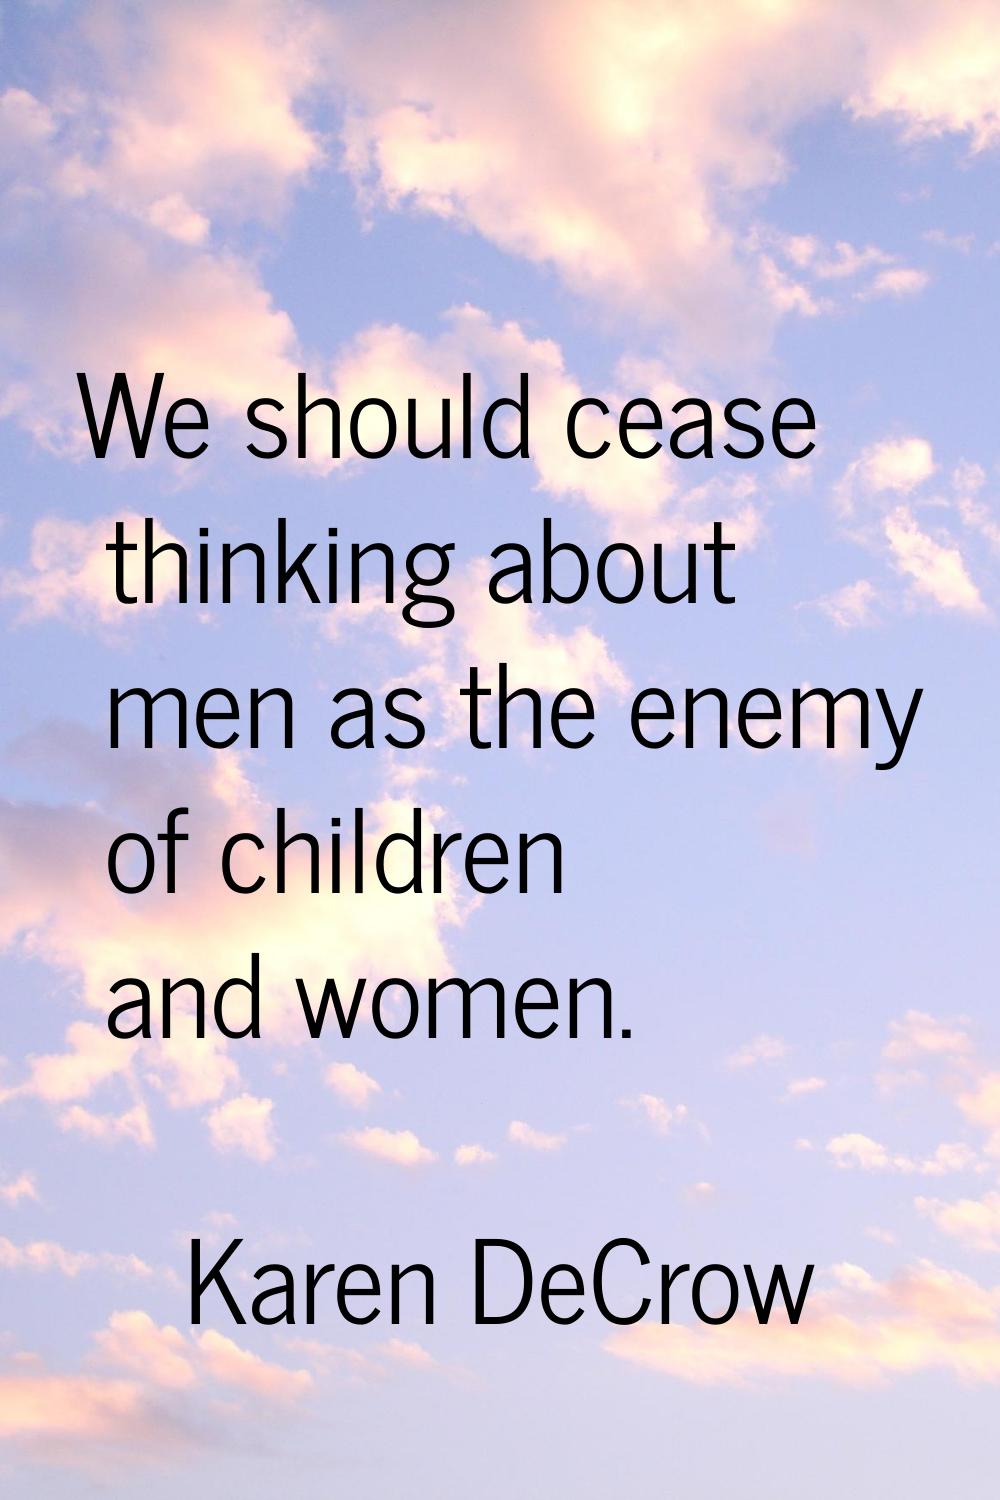 We should cease thinking about men as the enemy of children and women.